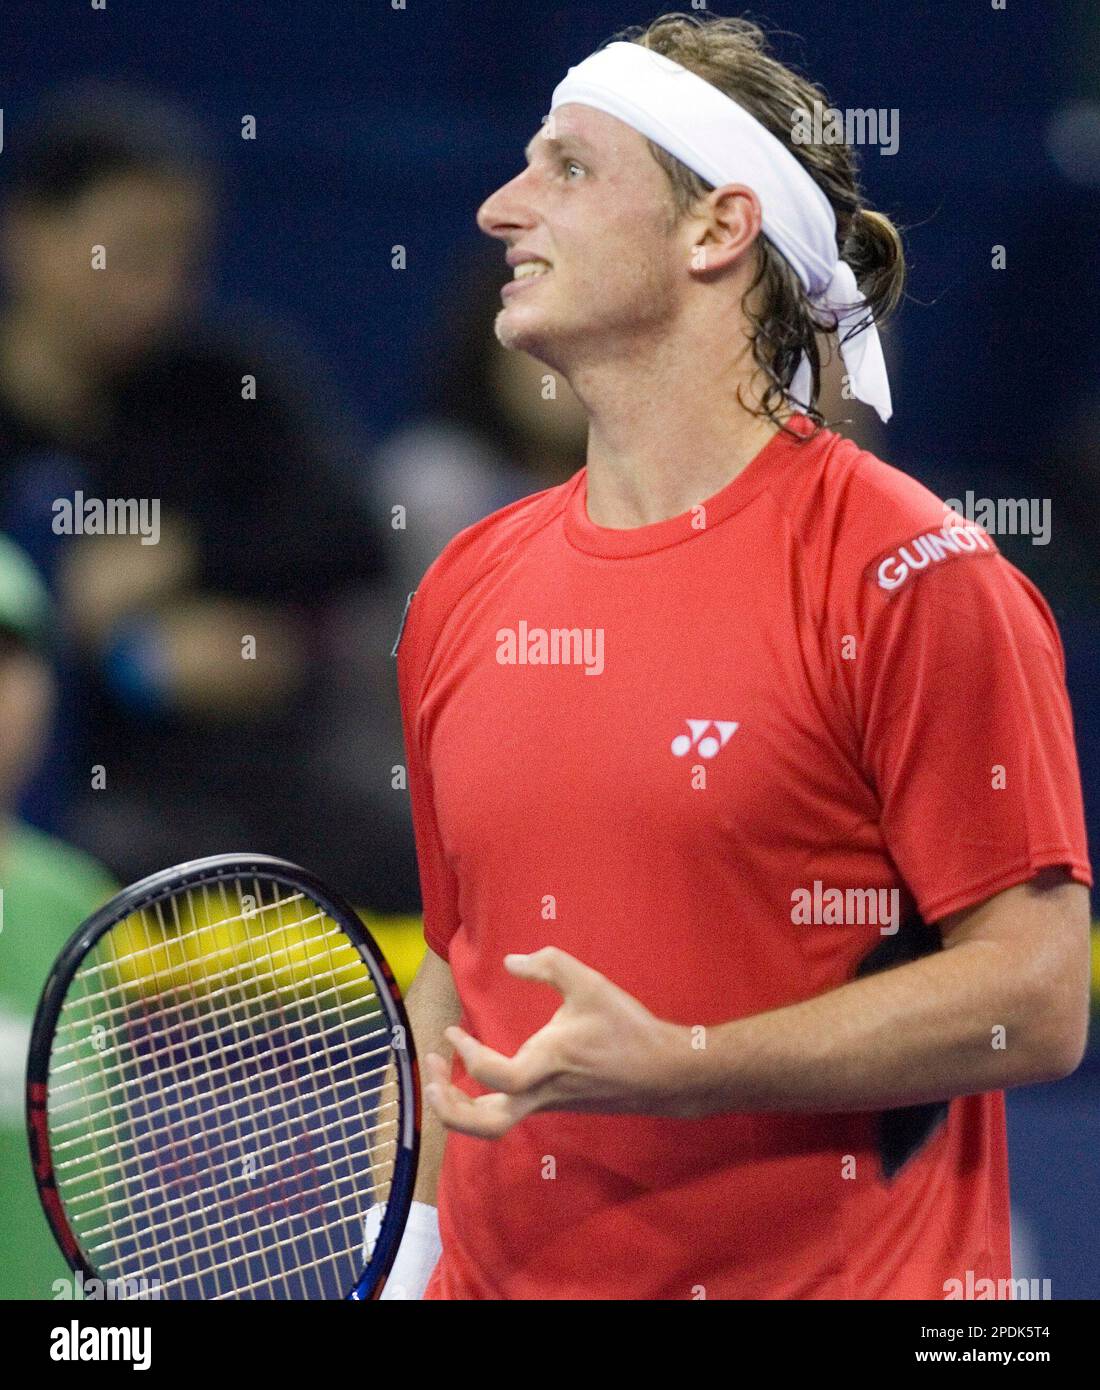 Agentina's David Nalbandian reacts after losing a point to world's number  one player, Switzerland's Roger Federer during the opening match for the Shanghai  Tennis Masters Cup held at the Qi Zhong stadium